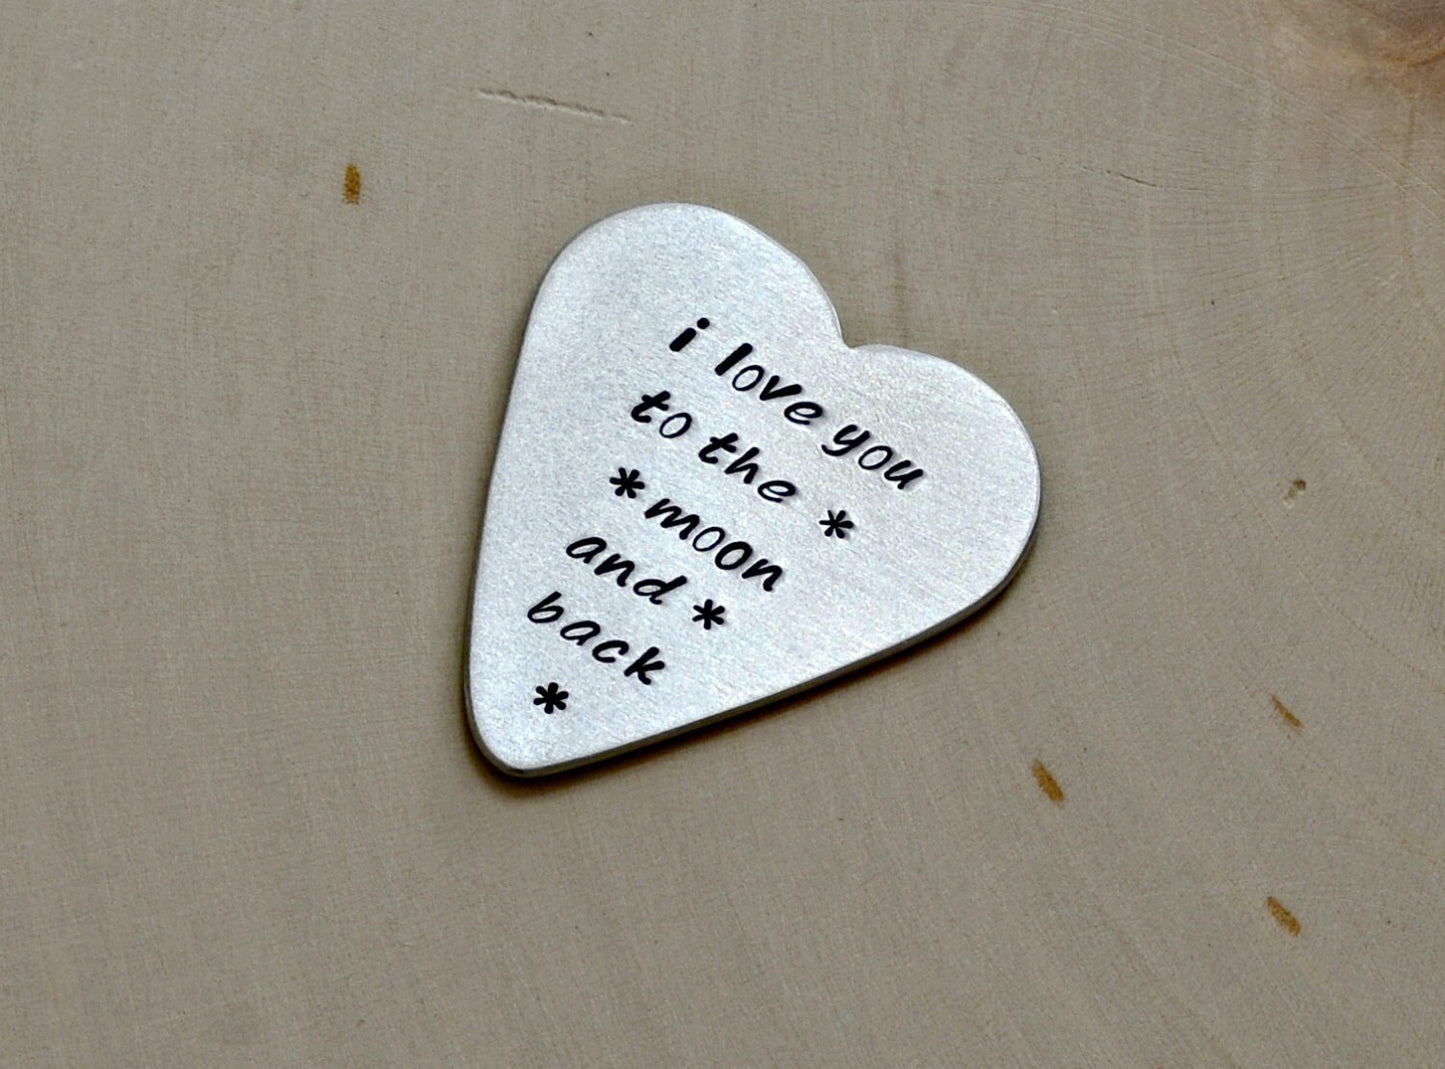 Love You To The Moon and Back Aluminum Heart Guitar Pick